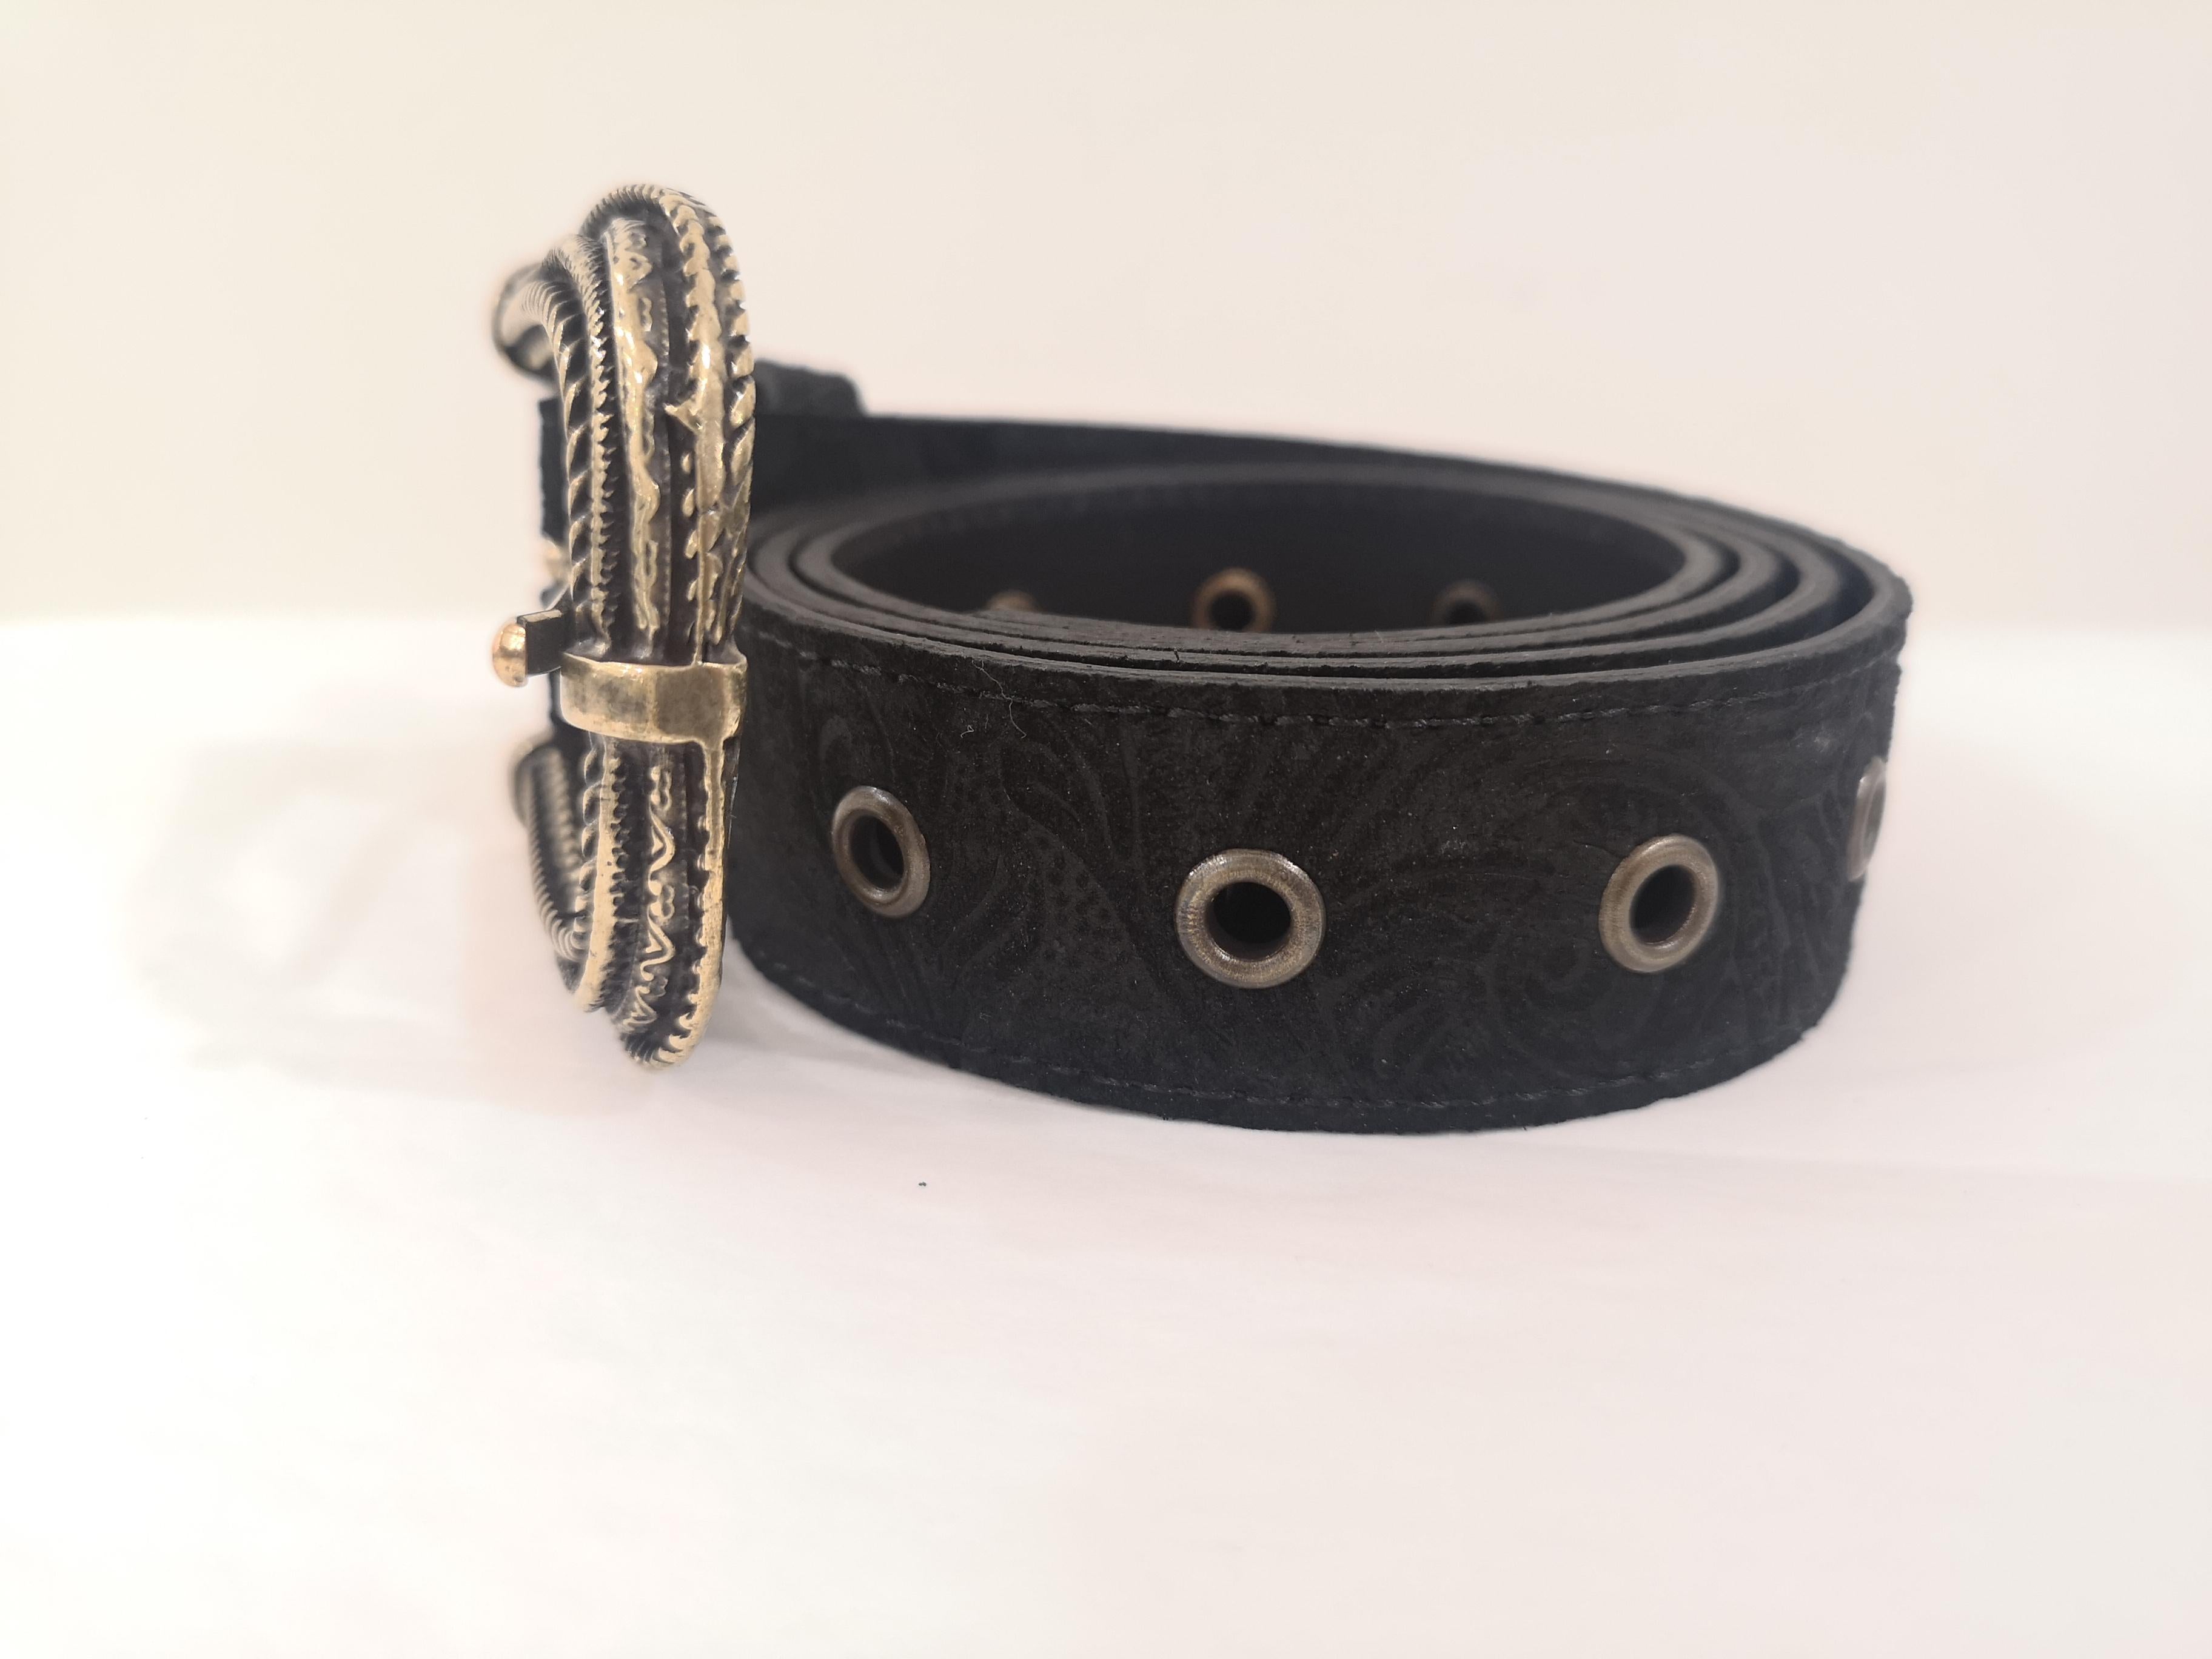 Black leather suede belt NWOT
totally made in italy
one size
total lenght 105 cm
heigh 3 cm